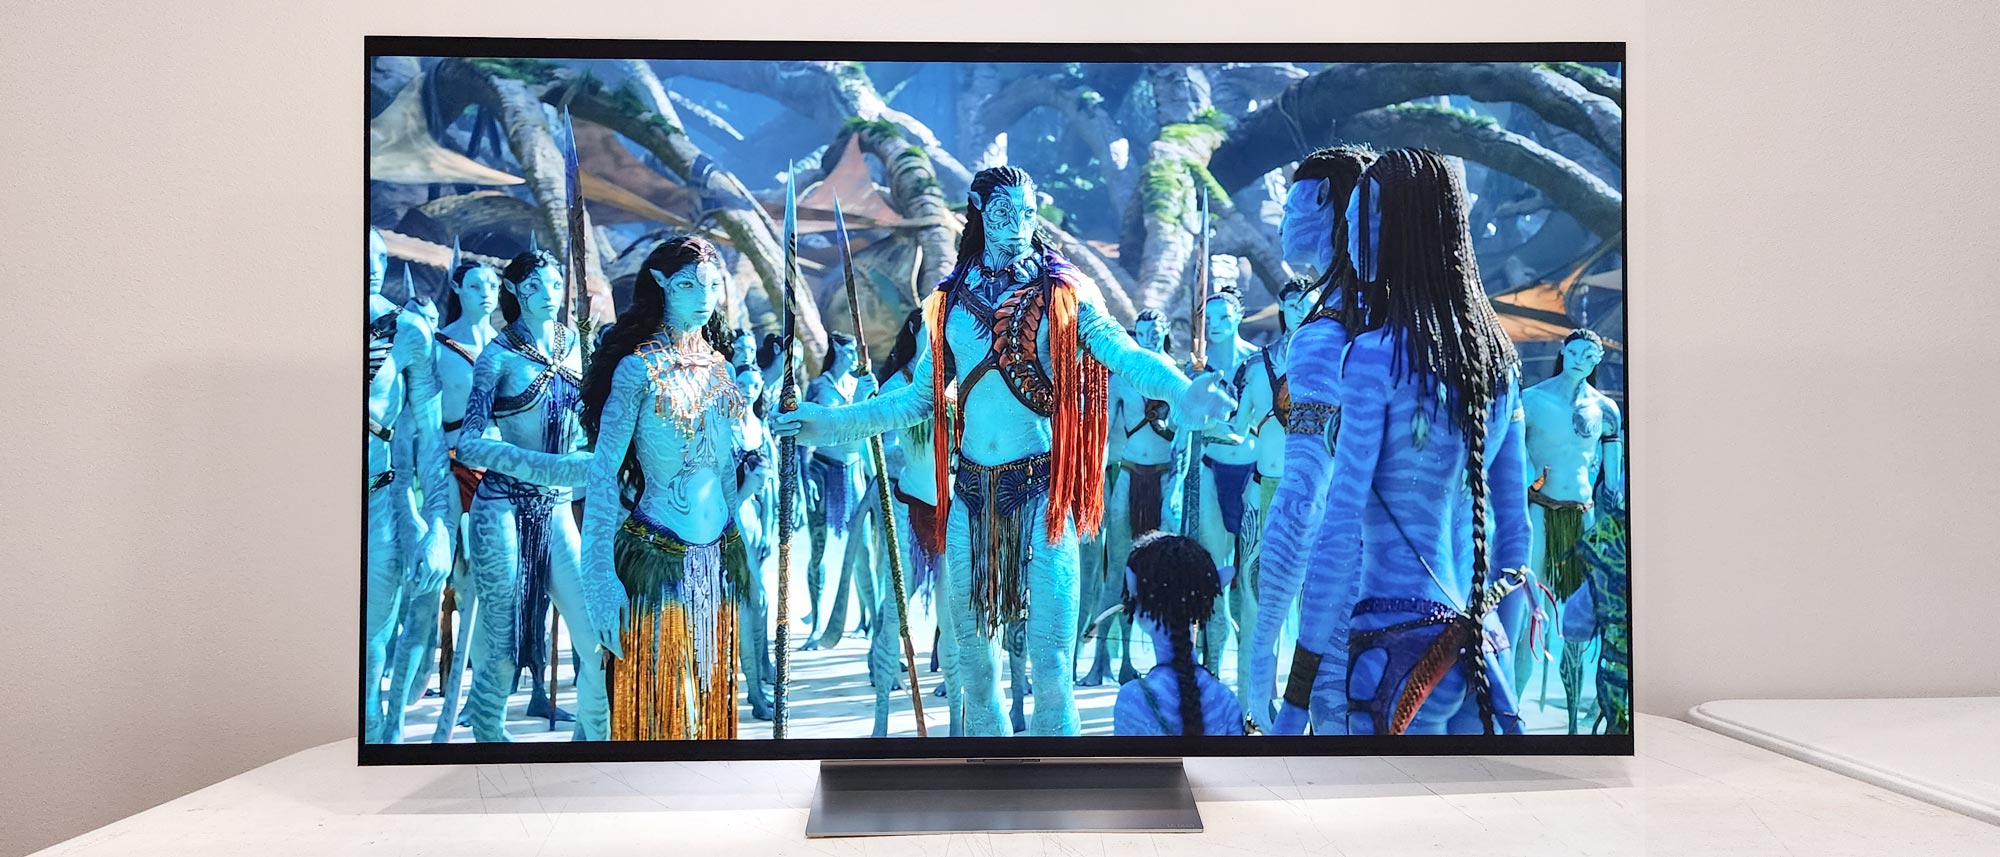 LG G3 OLED TV review: OLED's future looks bright